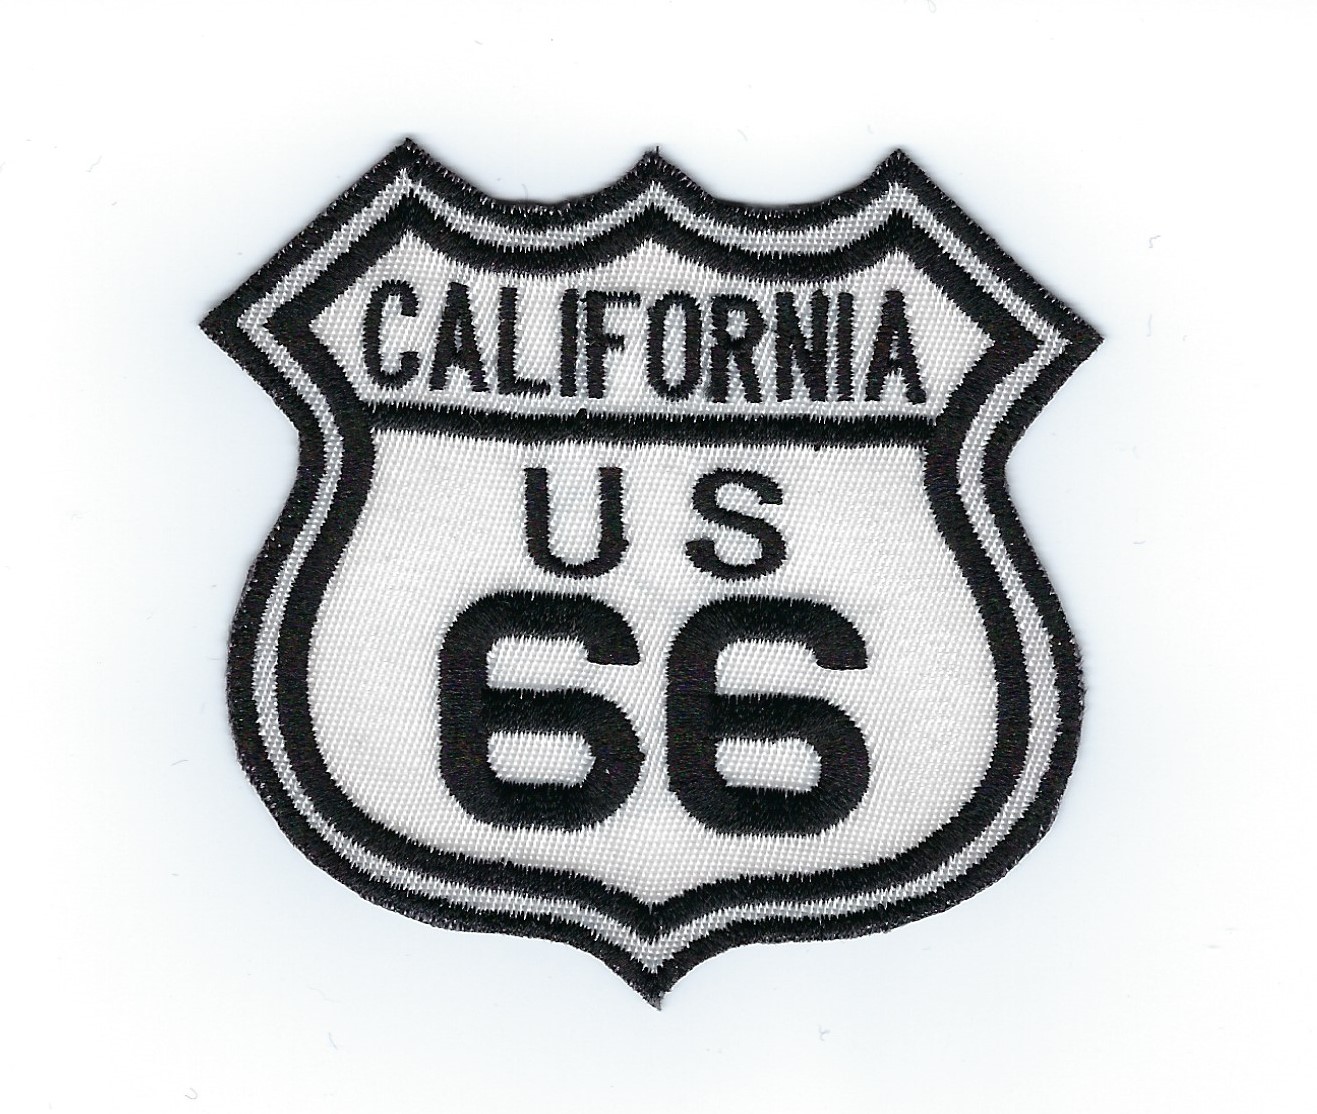 Route 66 California US patch, black & white street sign design, 3" x 2.8"